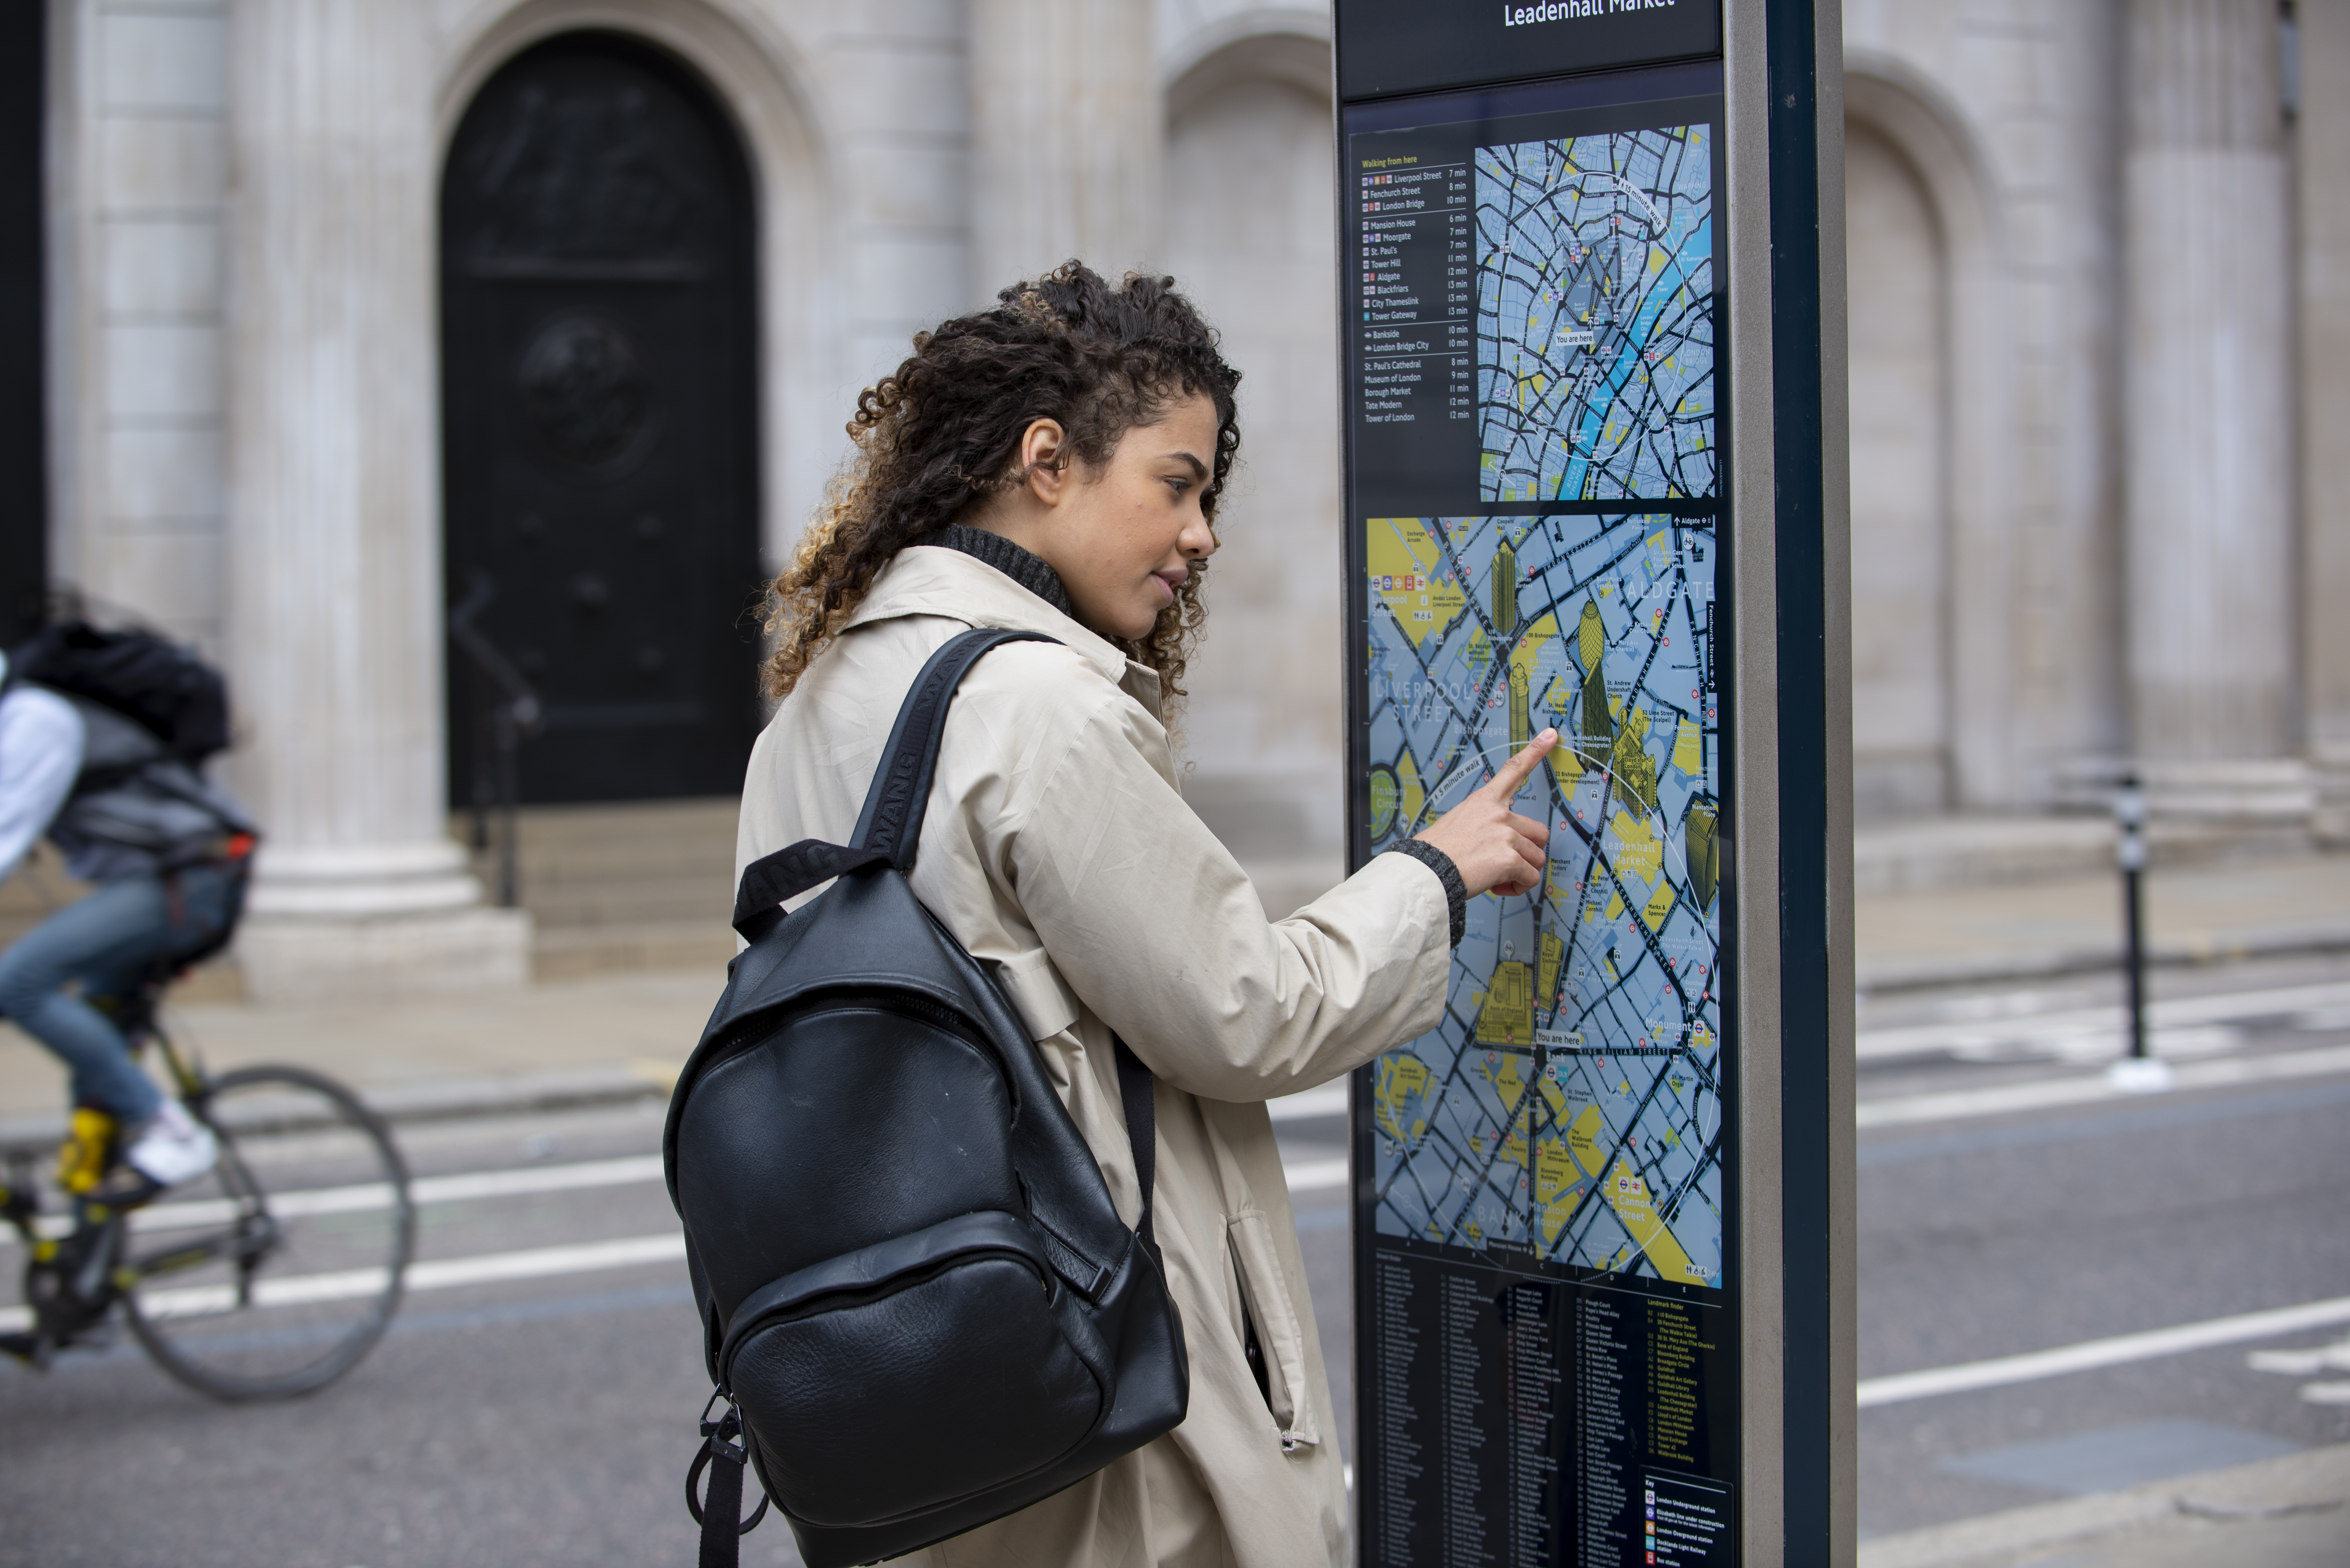 A female college student checking a European city's public transportation map